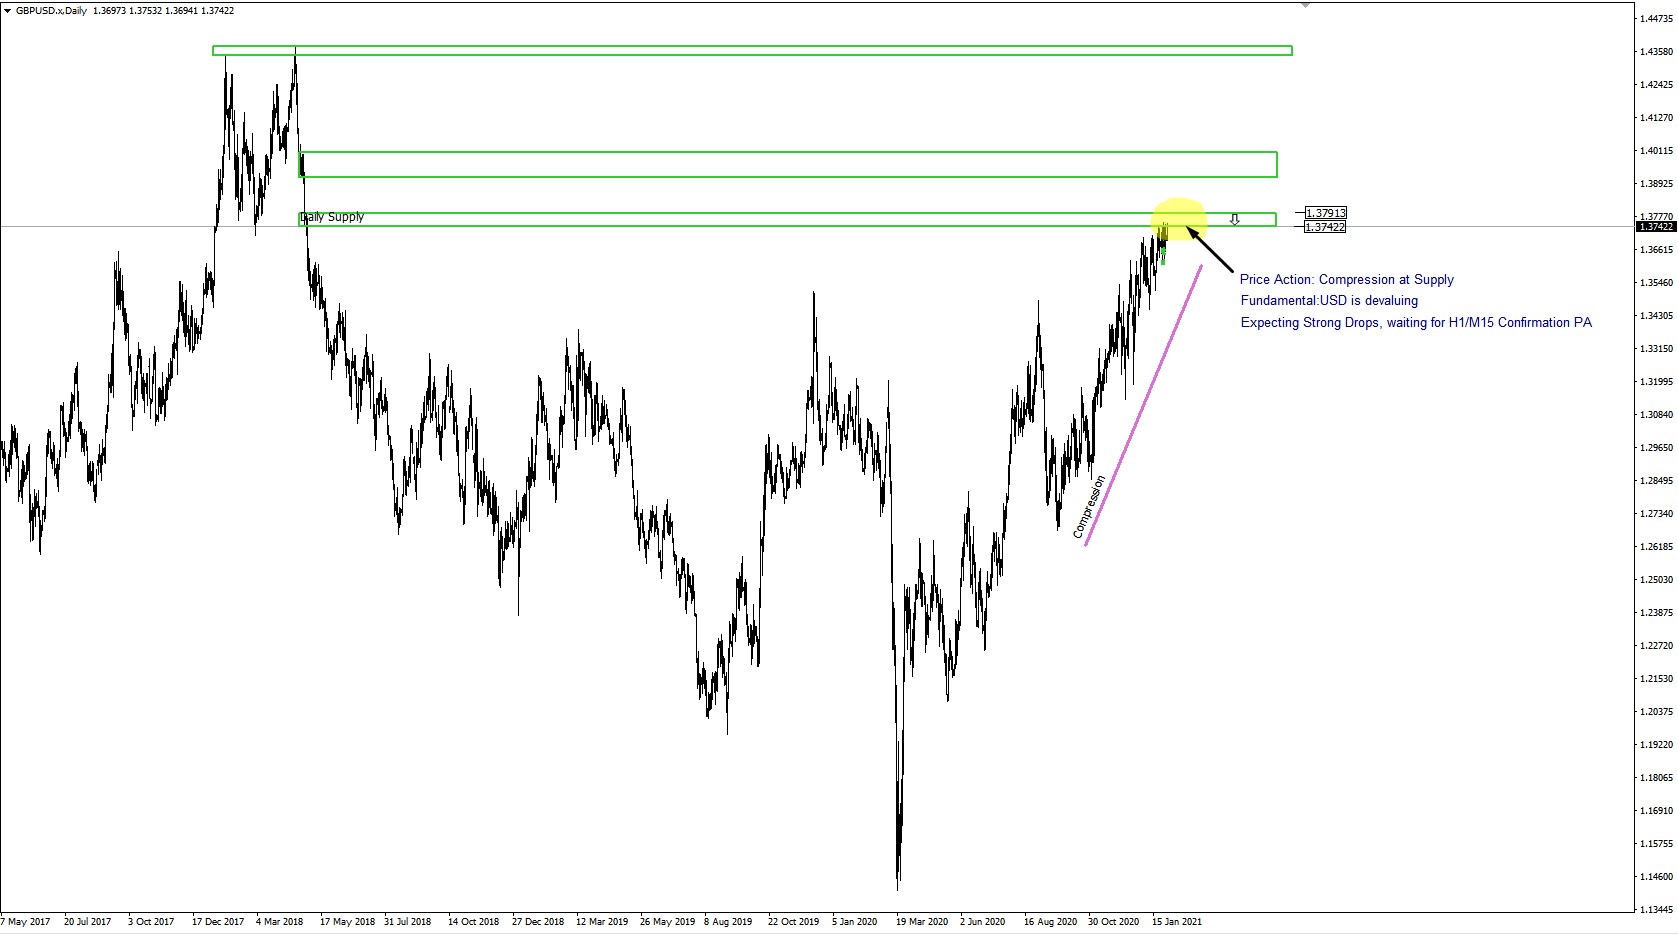 GU Compression To Supply - GBP/USD - Supply And Demand, Price Action